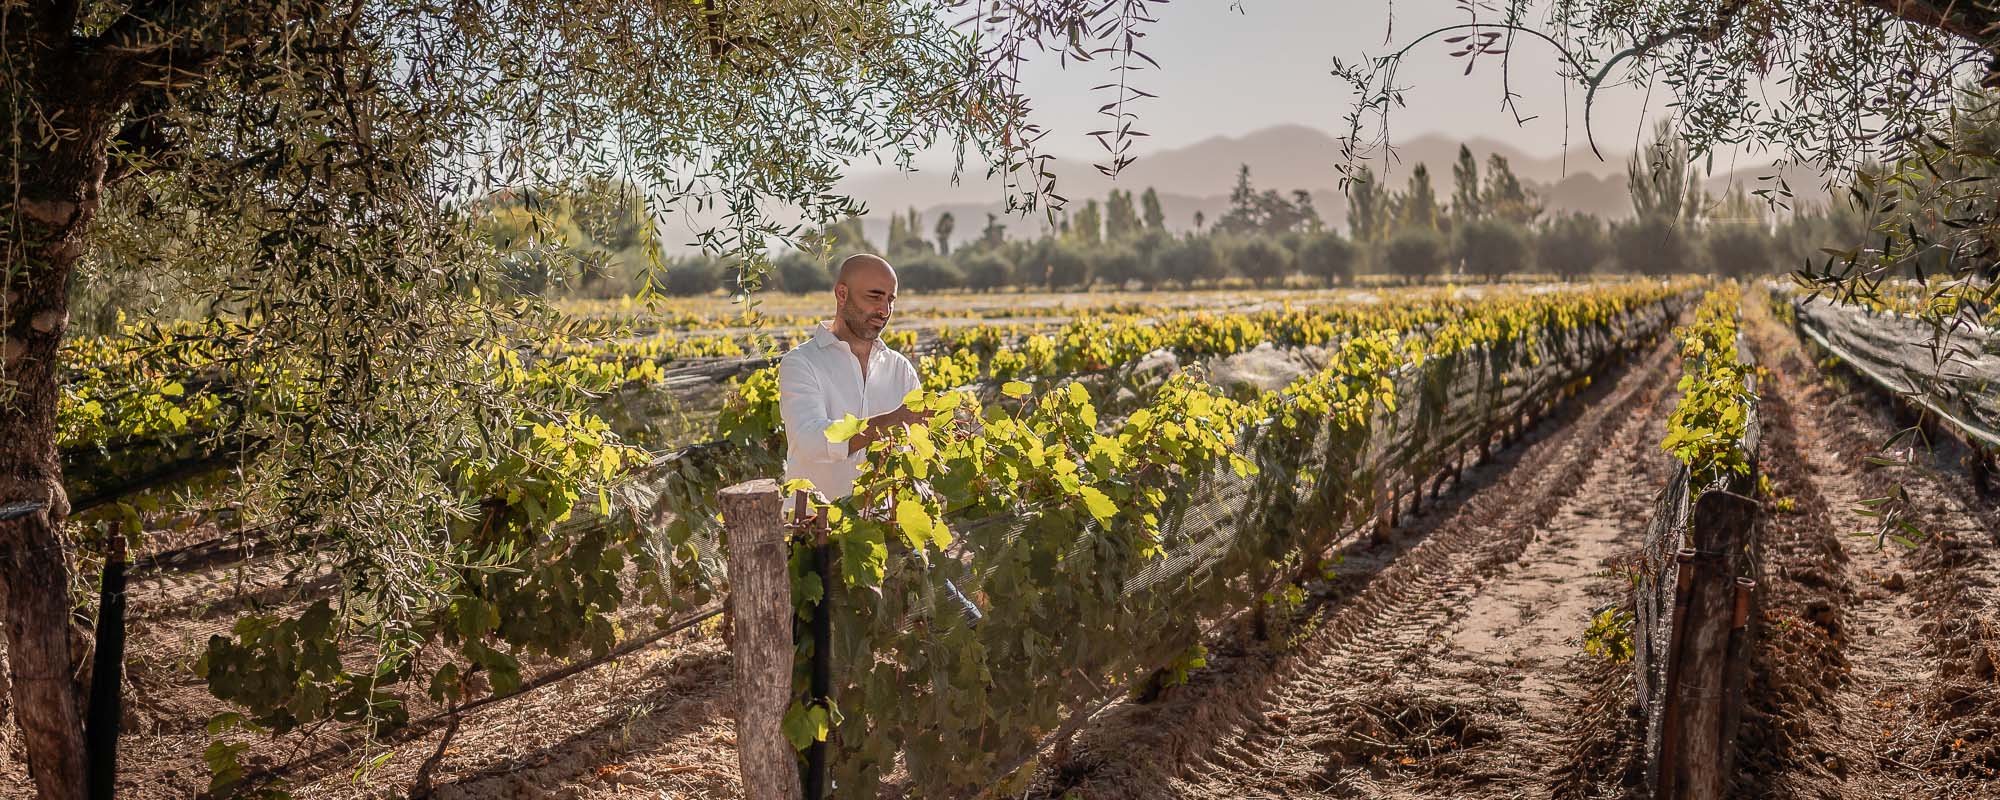 A photograph of a man inspecting a grapevine in a large vineyard with neatly planted trees and mountains in background. 